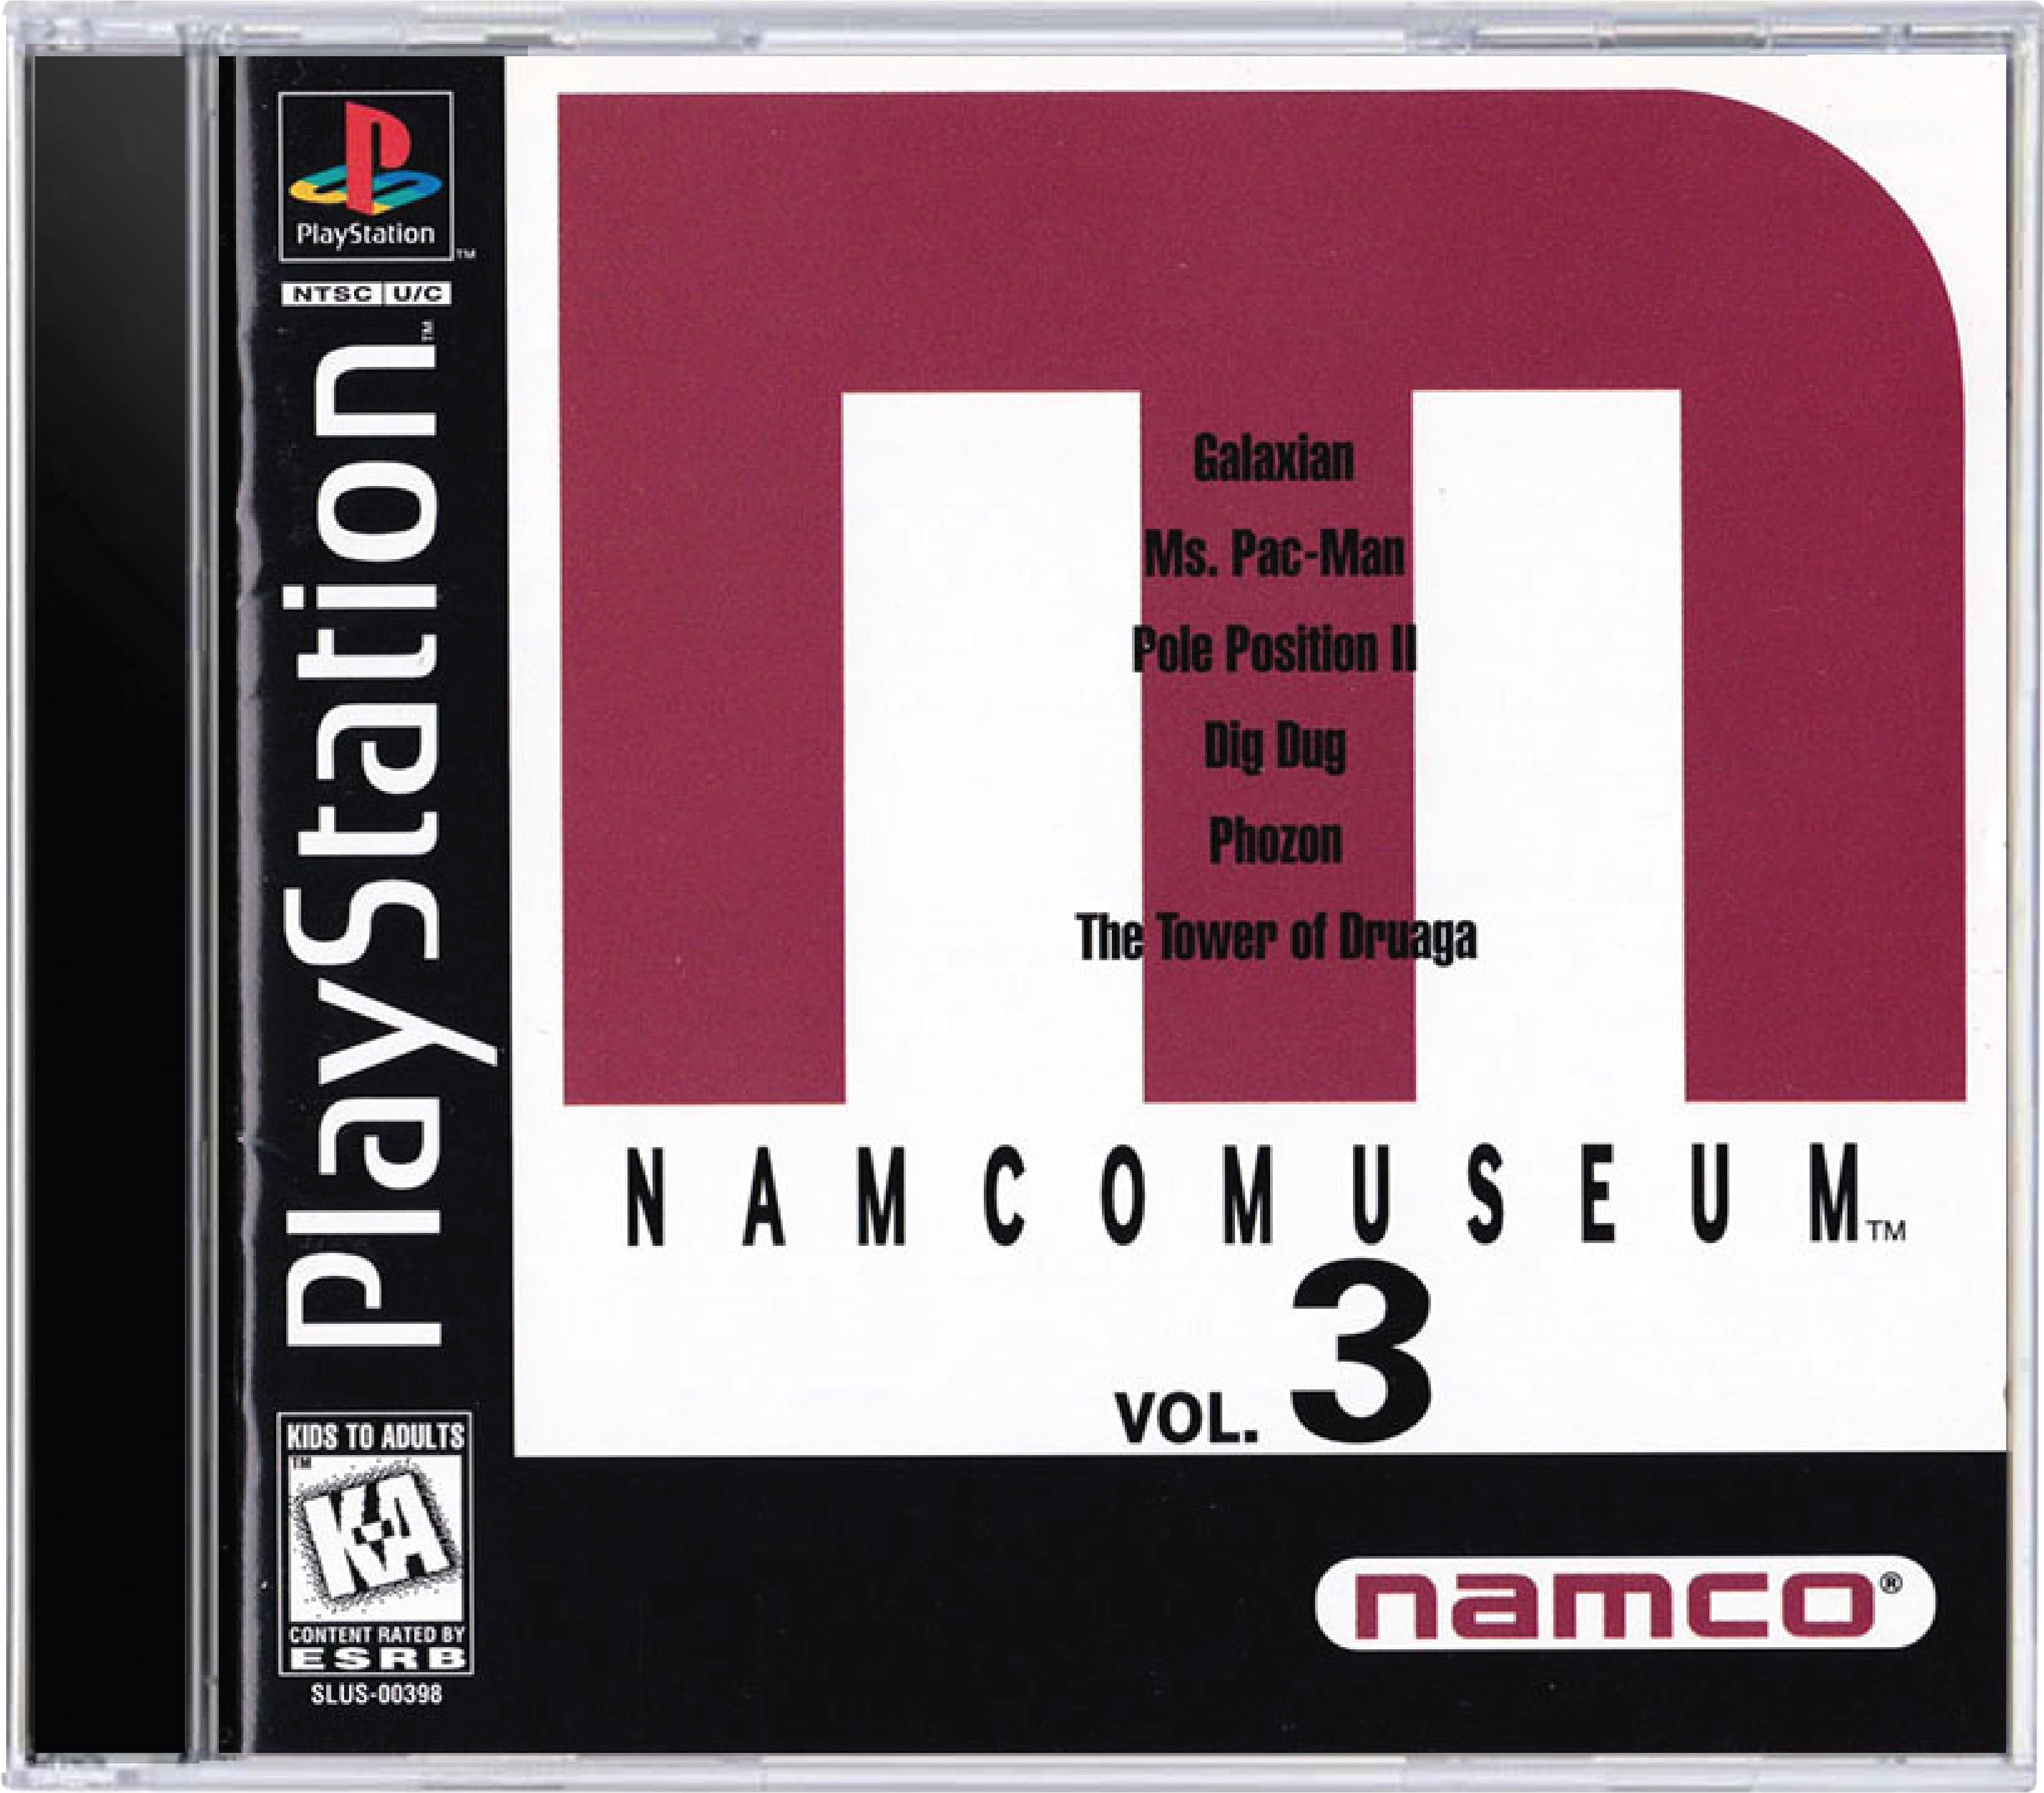 Namco Museum Volume 3 Cover Art and Product Photo